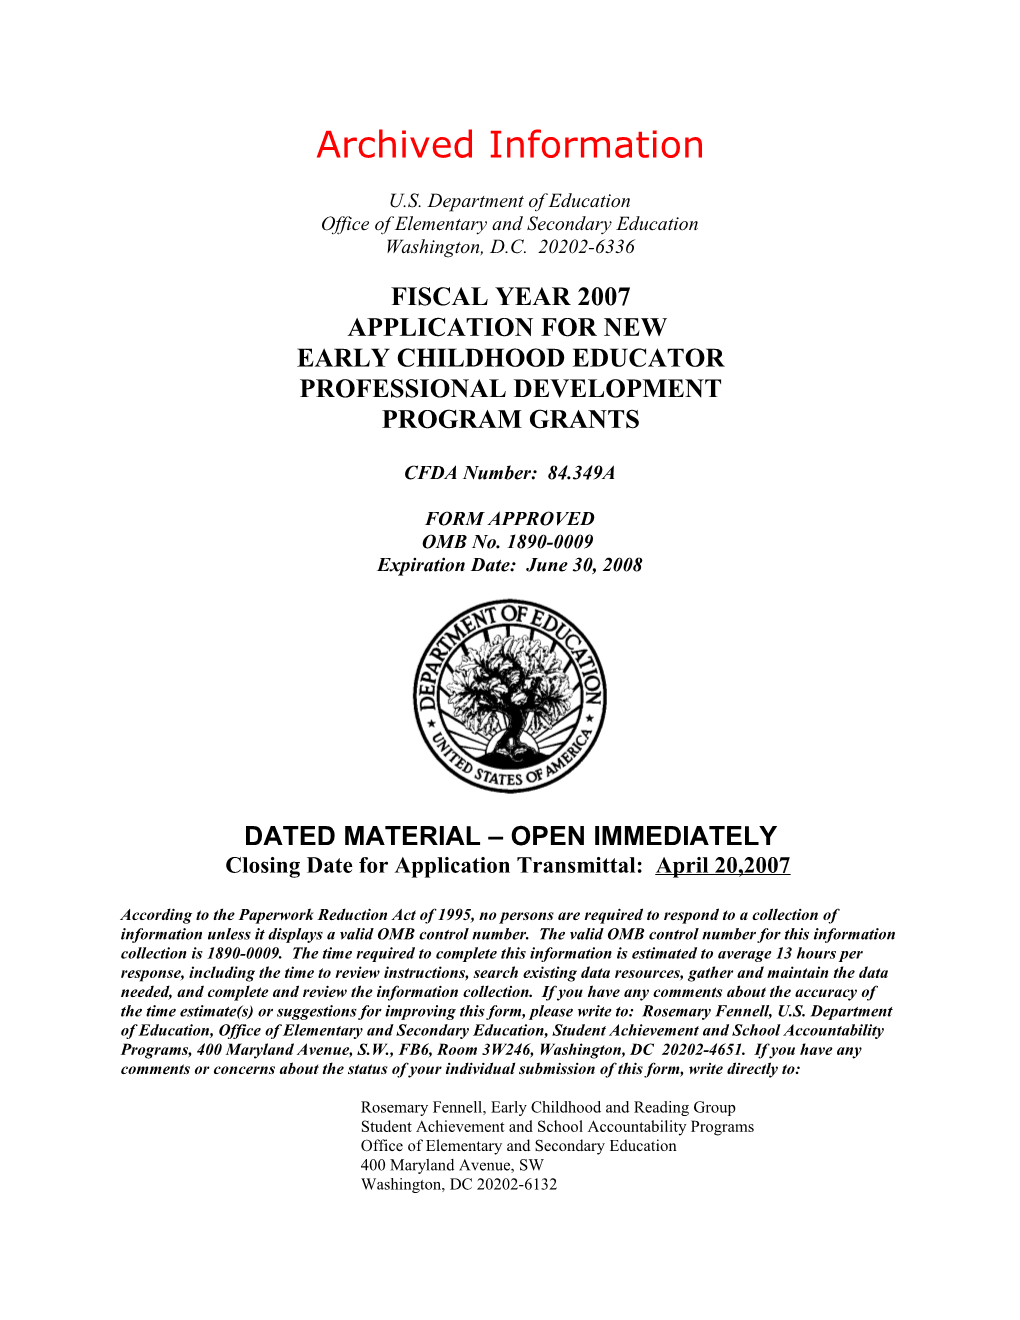 Archived: FY 2007 Application for Early Childhood Educator Professional Development Program